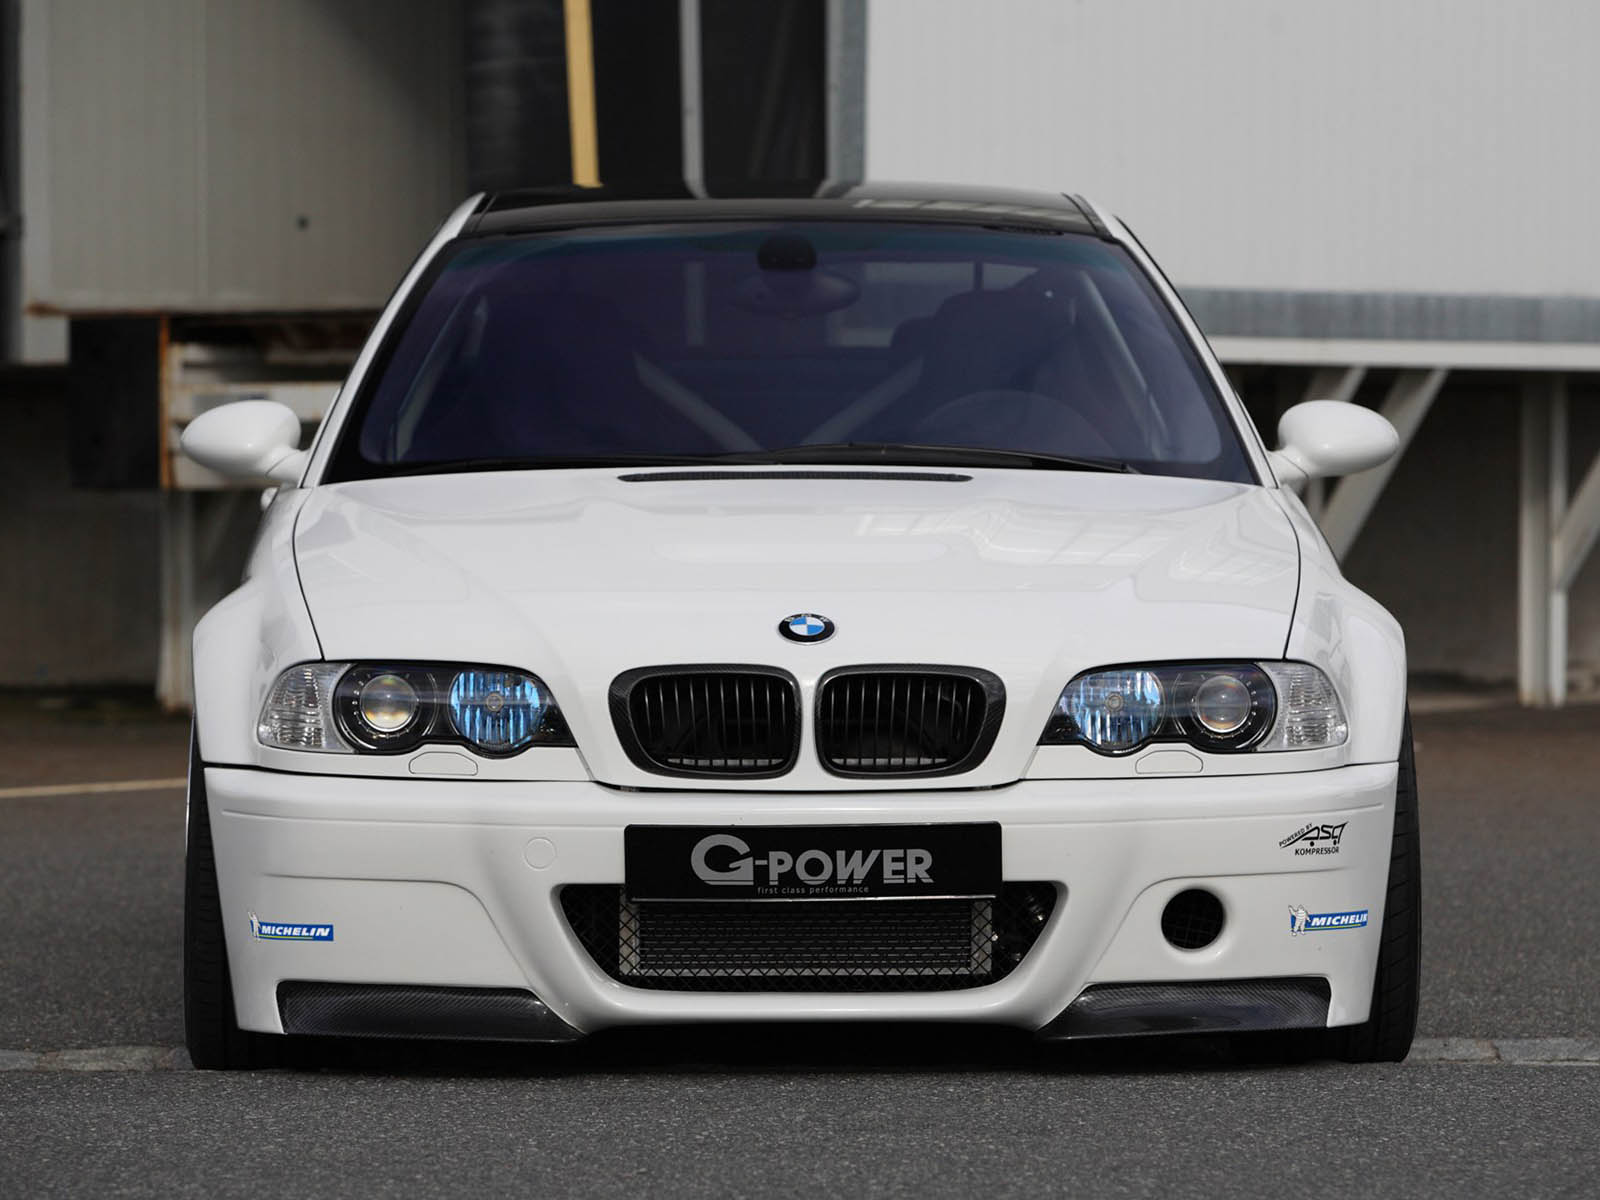 wallpapers: BMW M3 E46 CSL Car Wallpapers